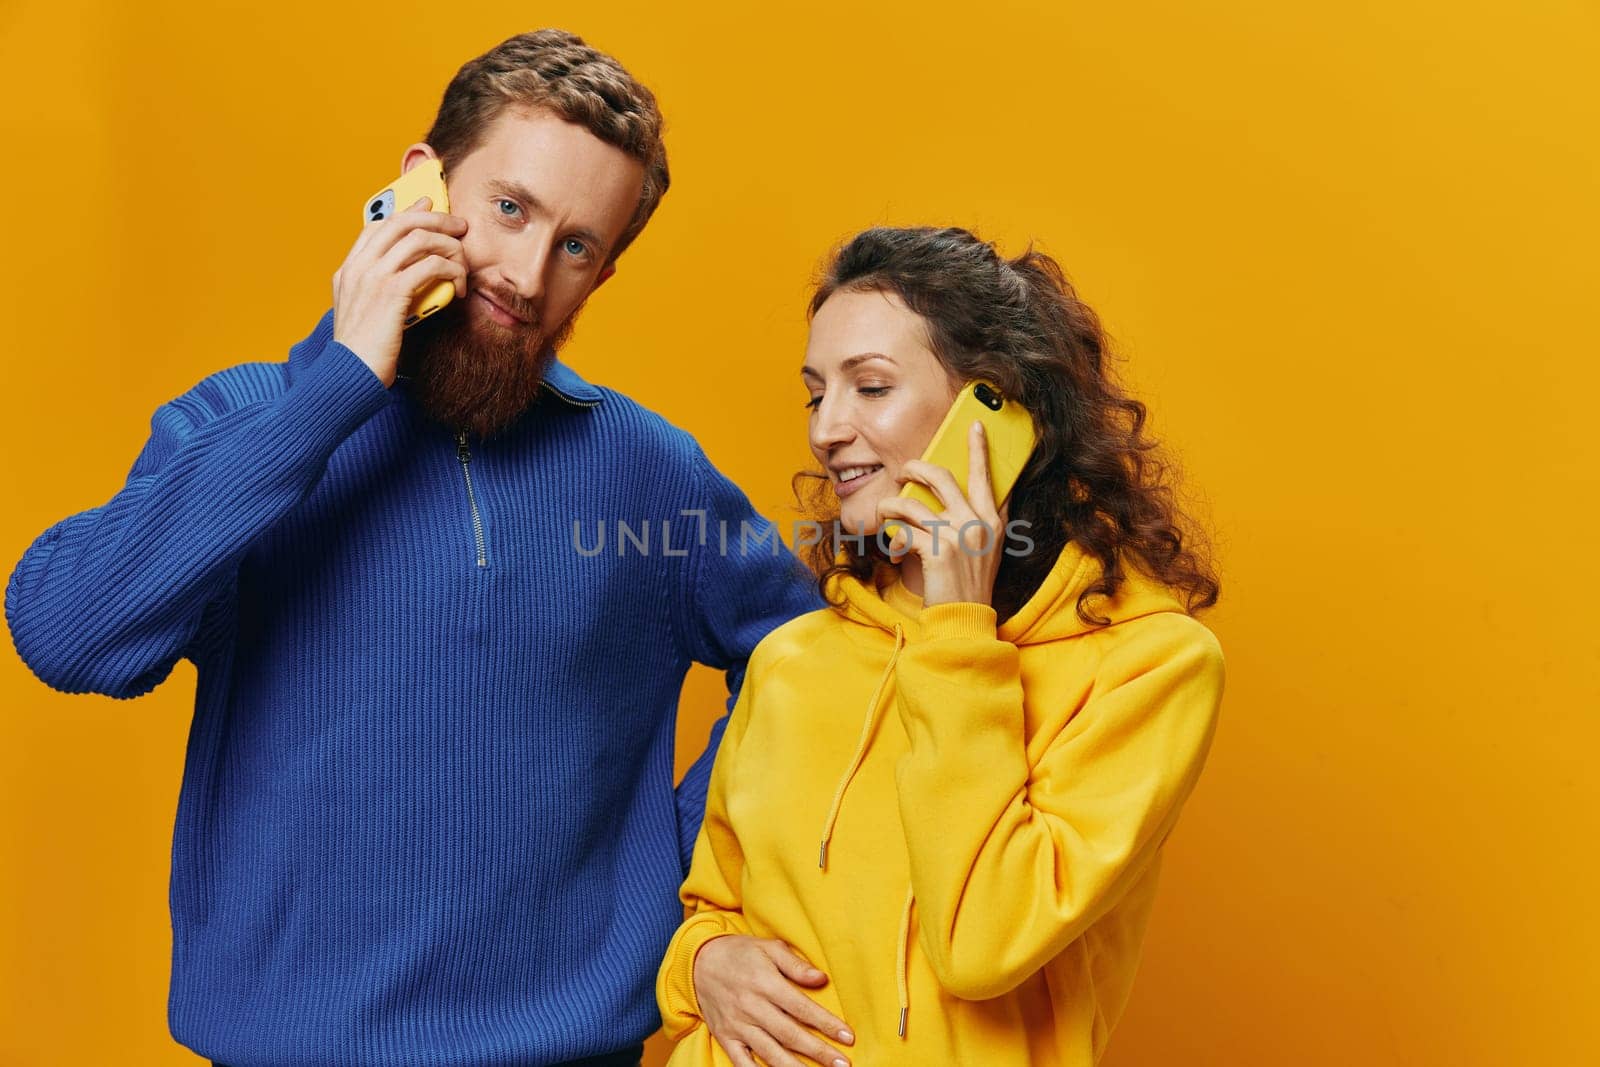 Man and woman couple smiling merrily with phone in hand social media viewing photos and videos, on yellow background, symbols signs and hand gestures, family freelancers. by SHOTPRIME